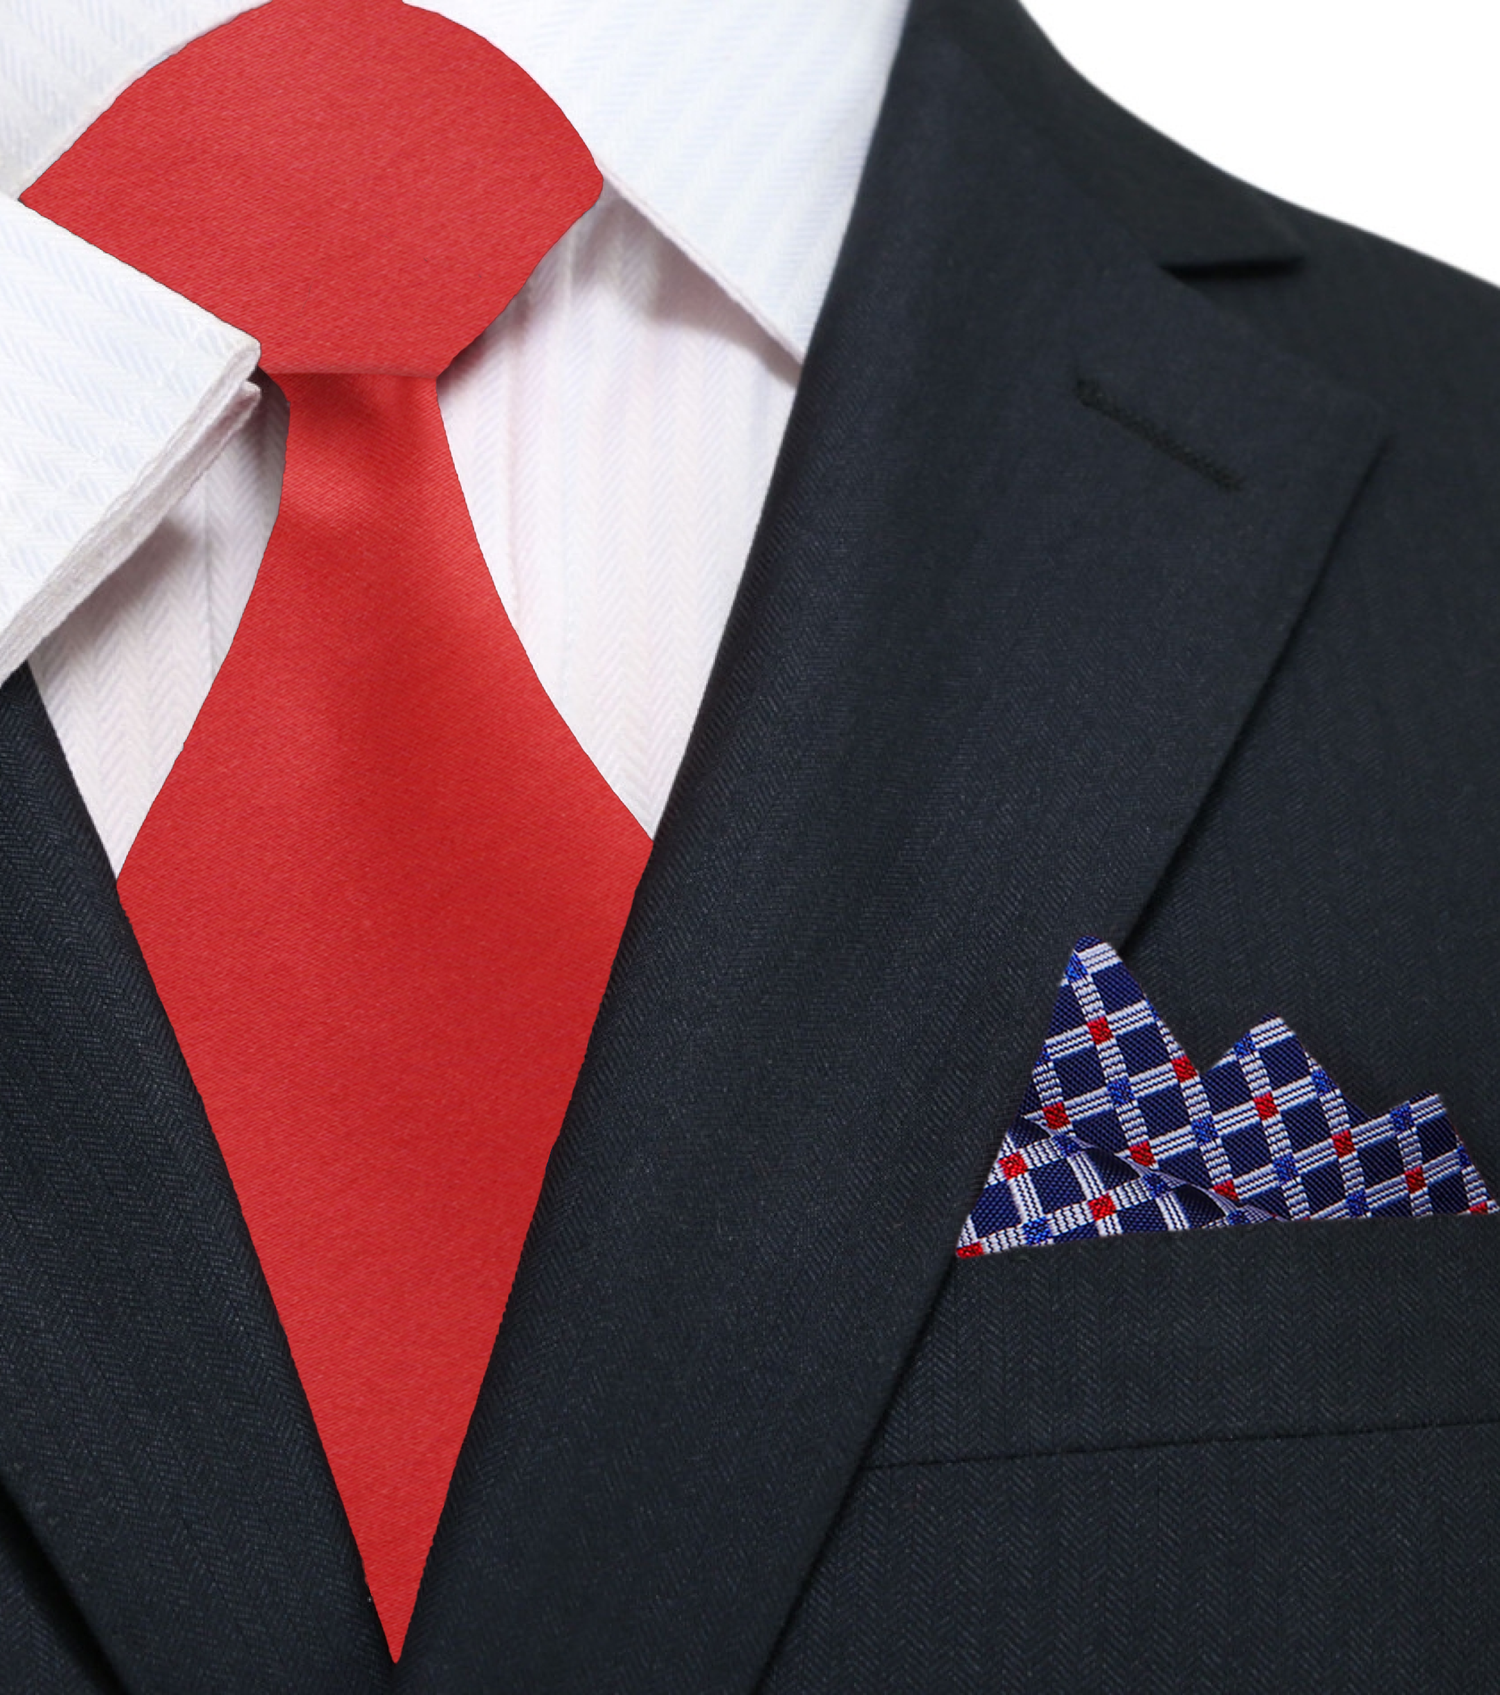 Solid Red Square Necktie and Accenting Dark Blue, Grey and Red Small Check Square